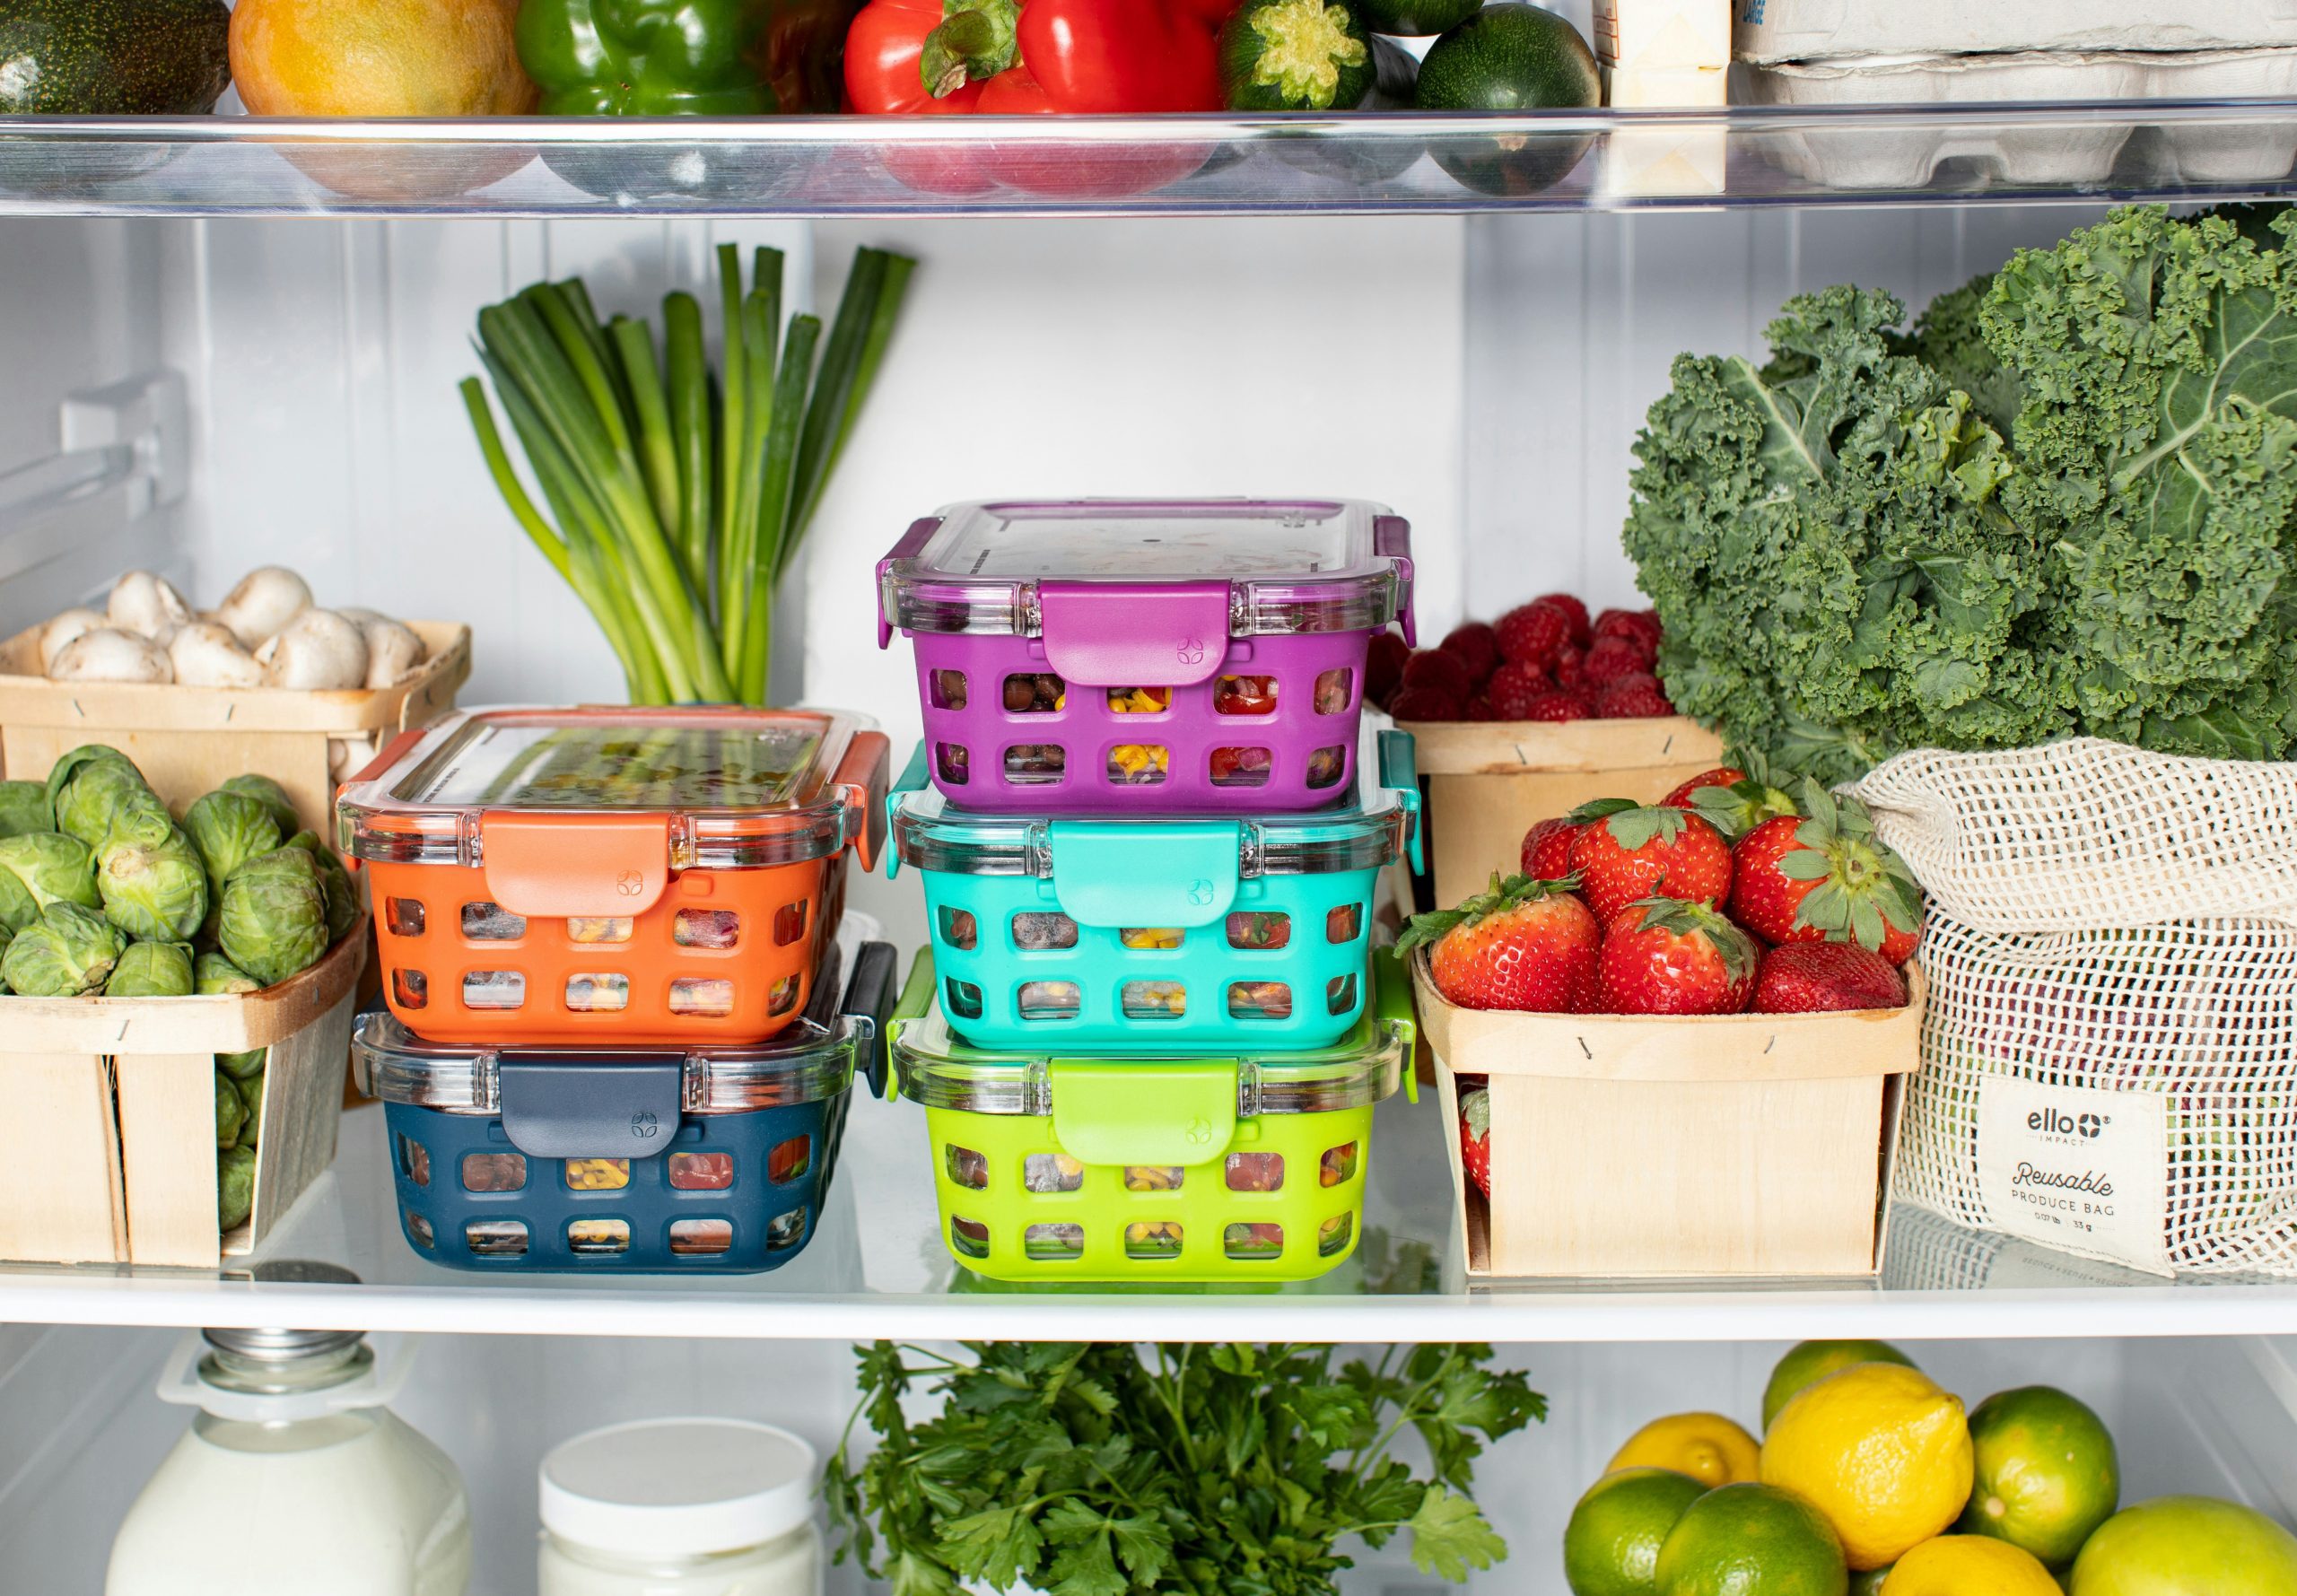 the inside of a refrigerator with lots of fresh fruits and vegetables and containers of leftovers